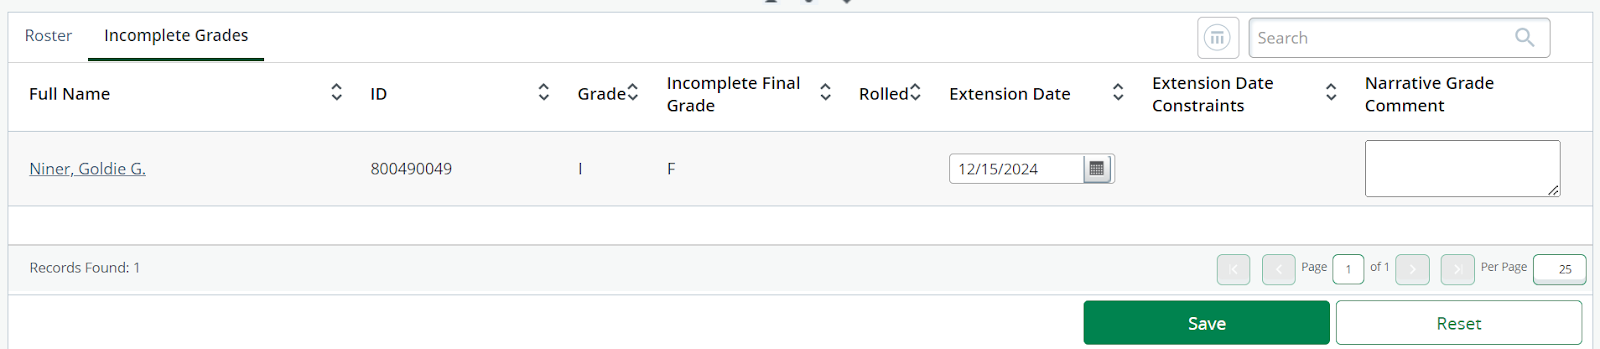 Incomplete grades tab open